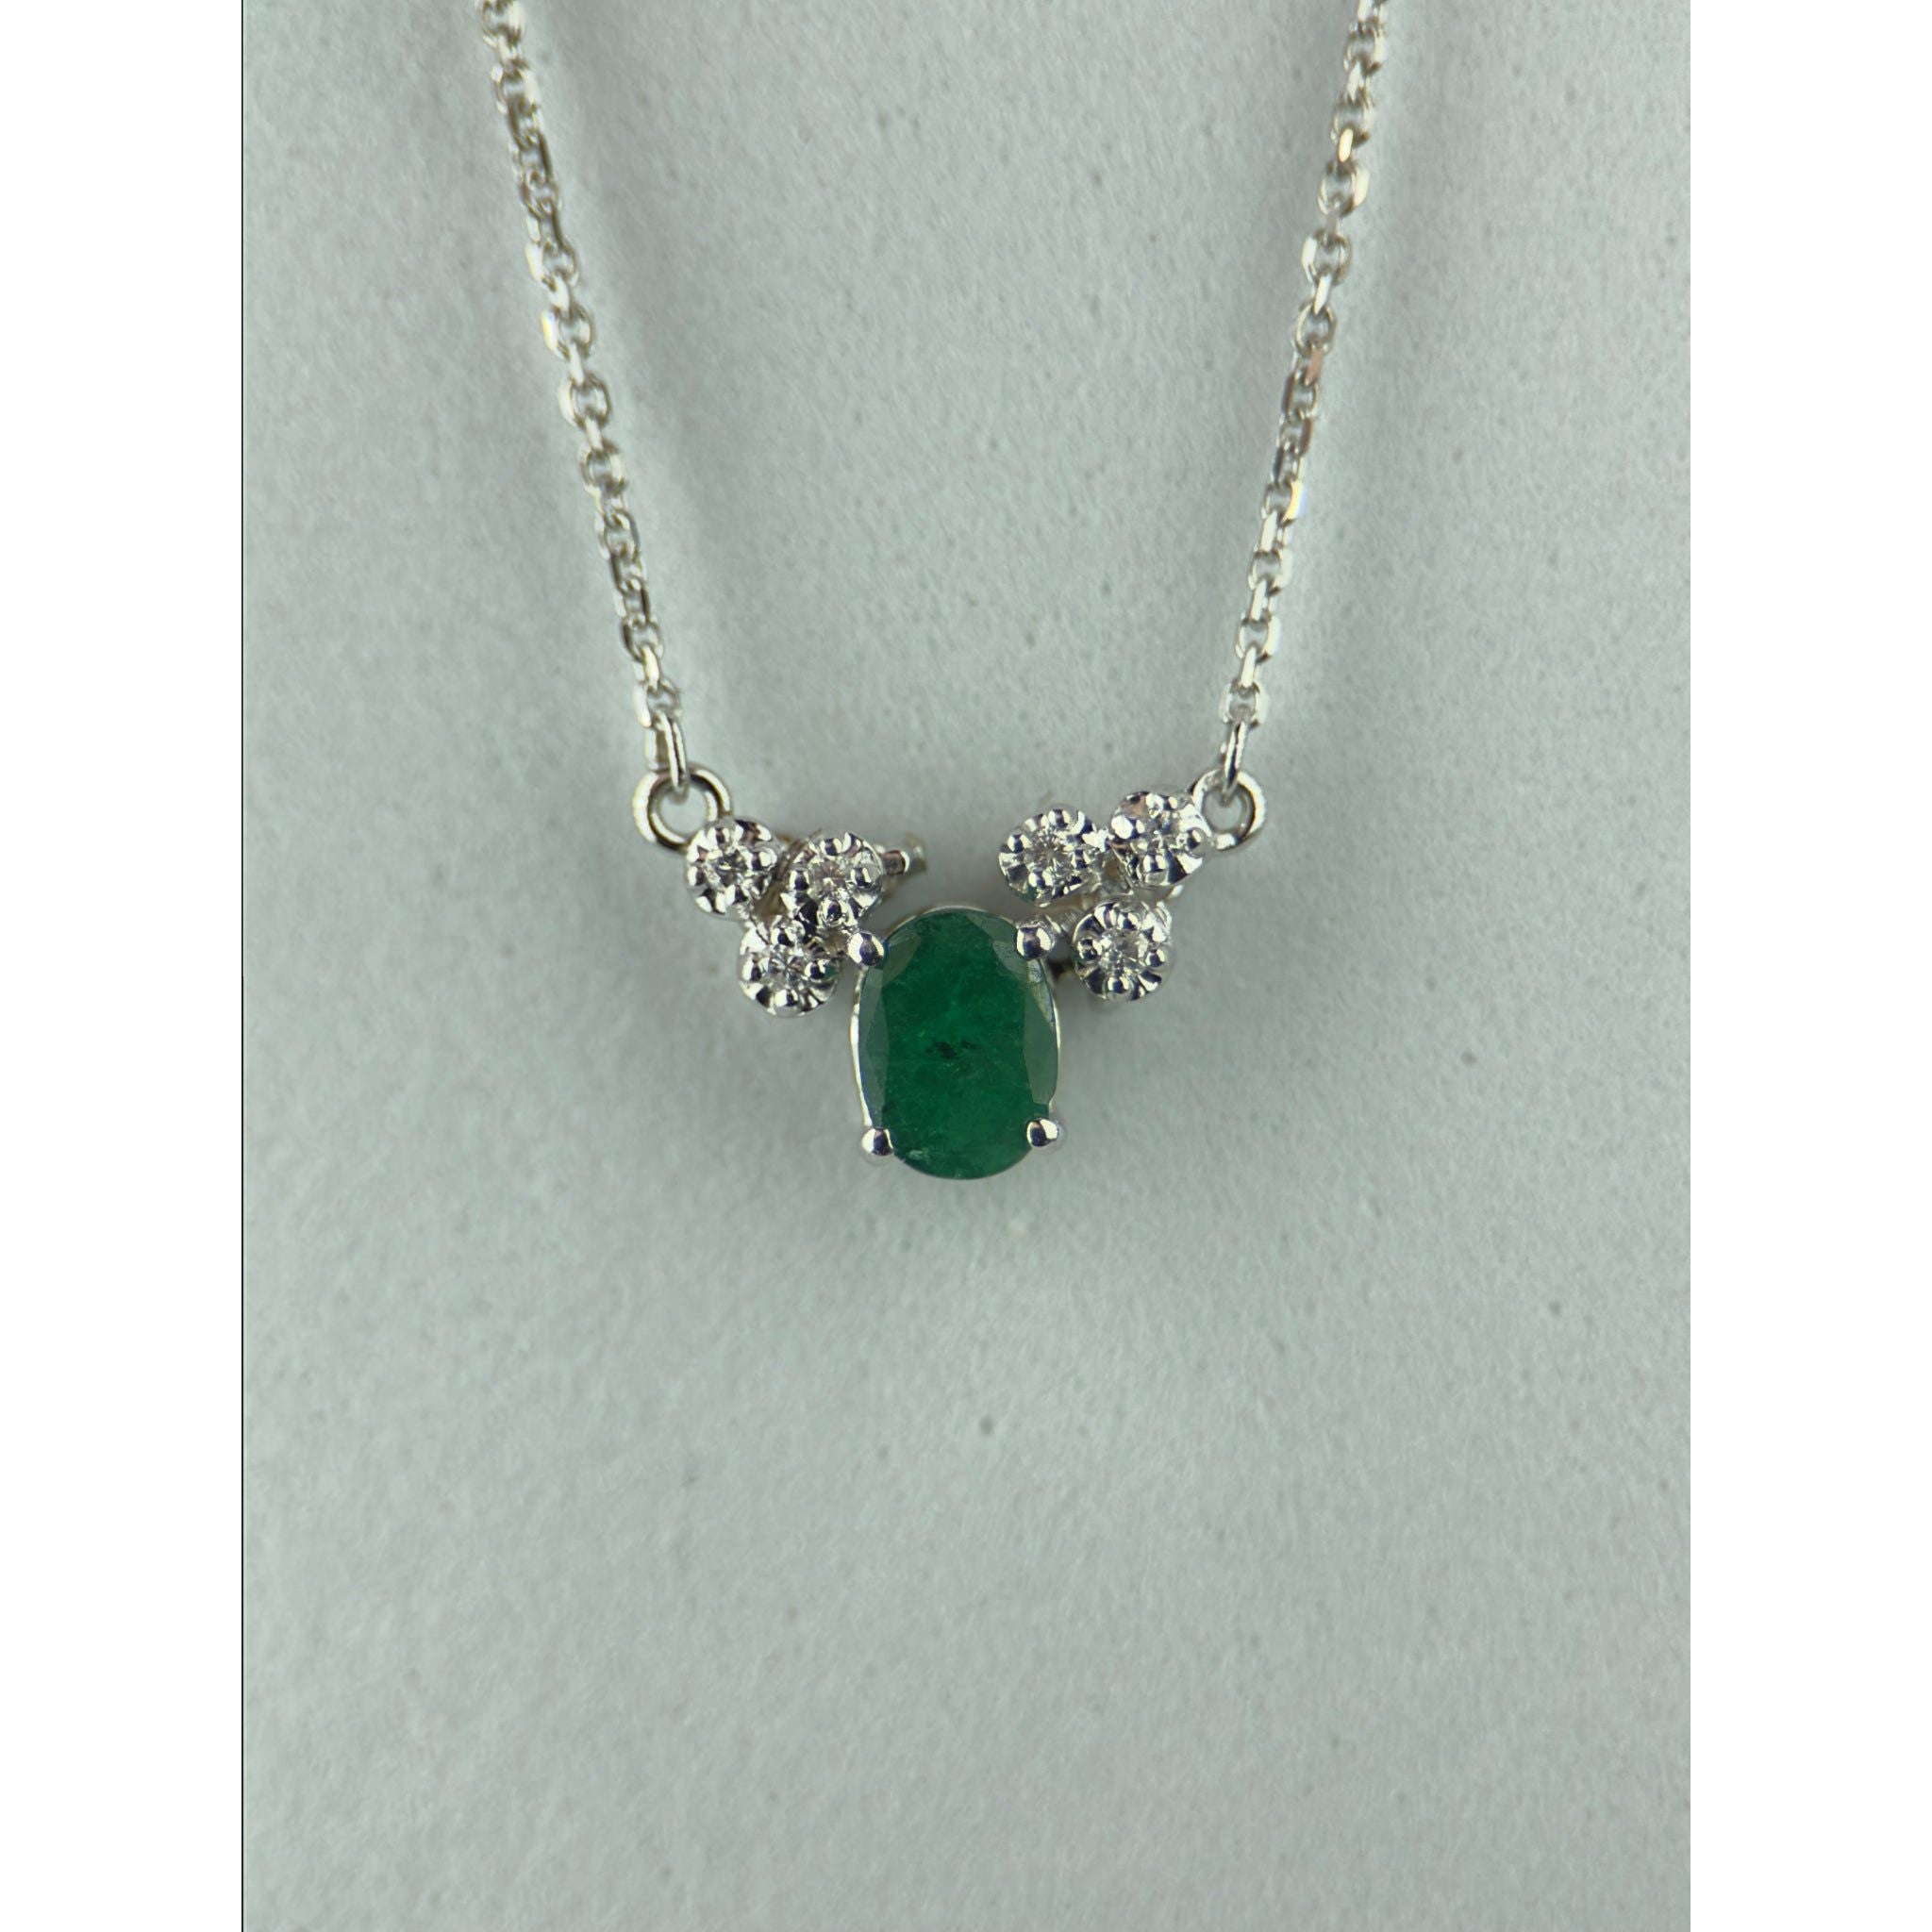 DR1052 - 14K White Gold - Emerald - Pendant and Chain